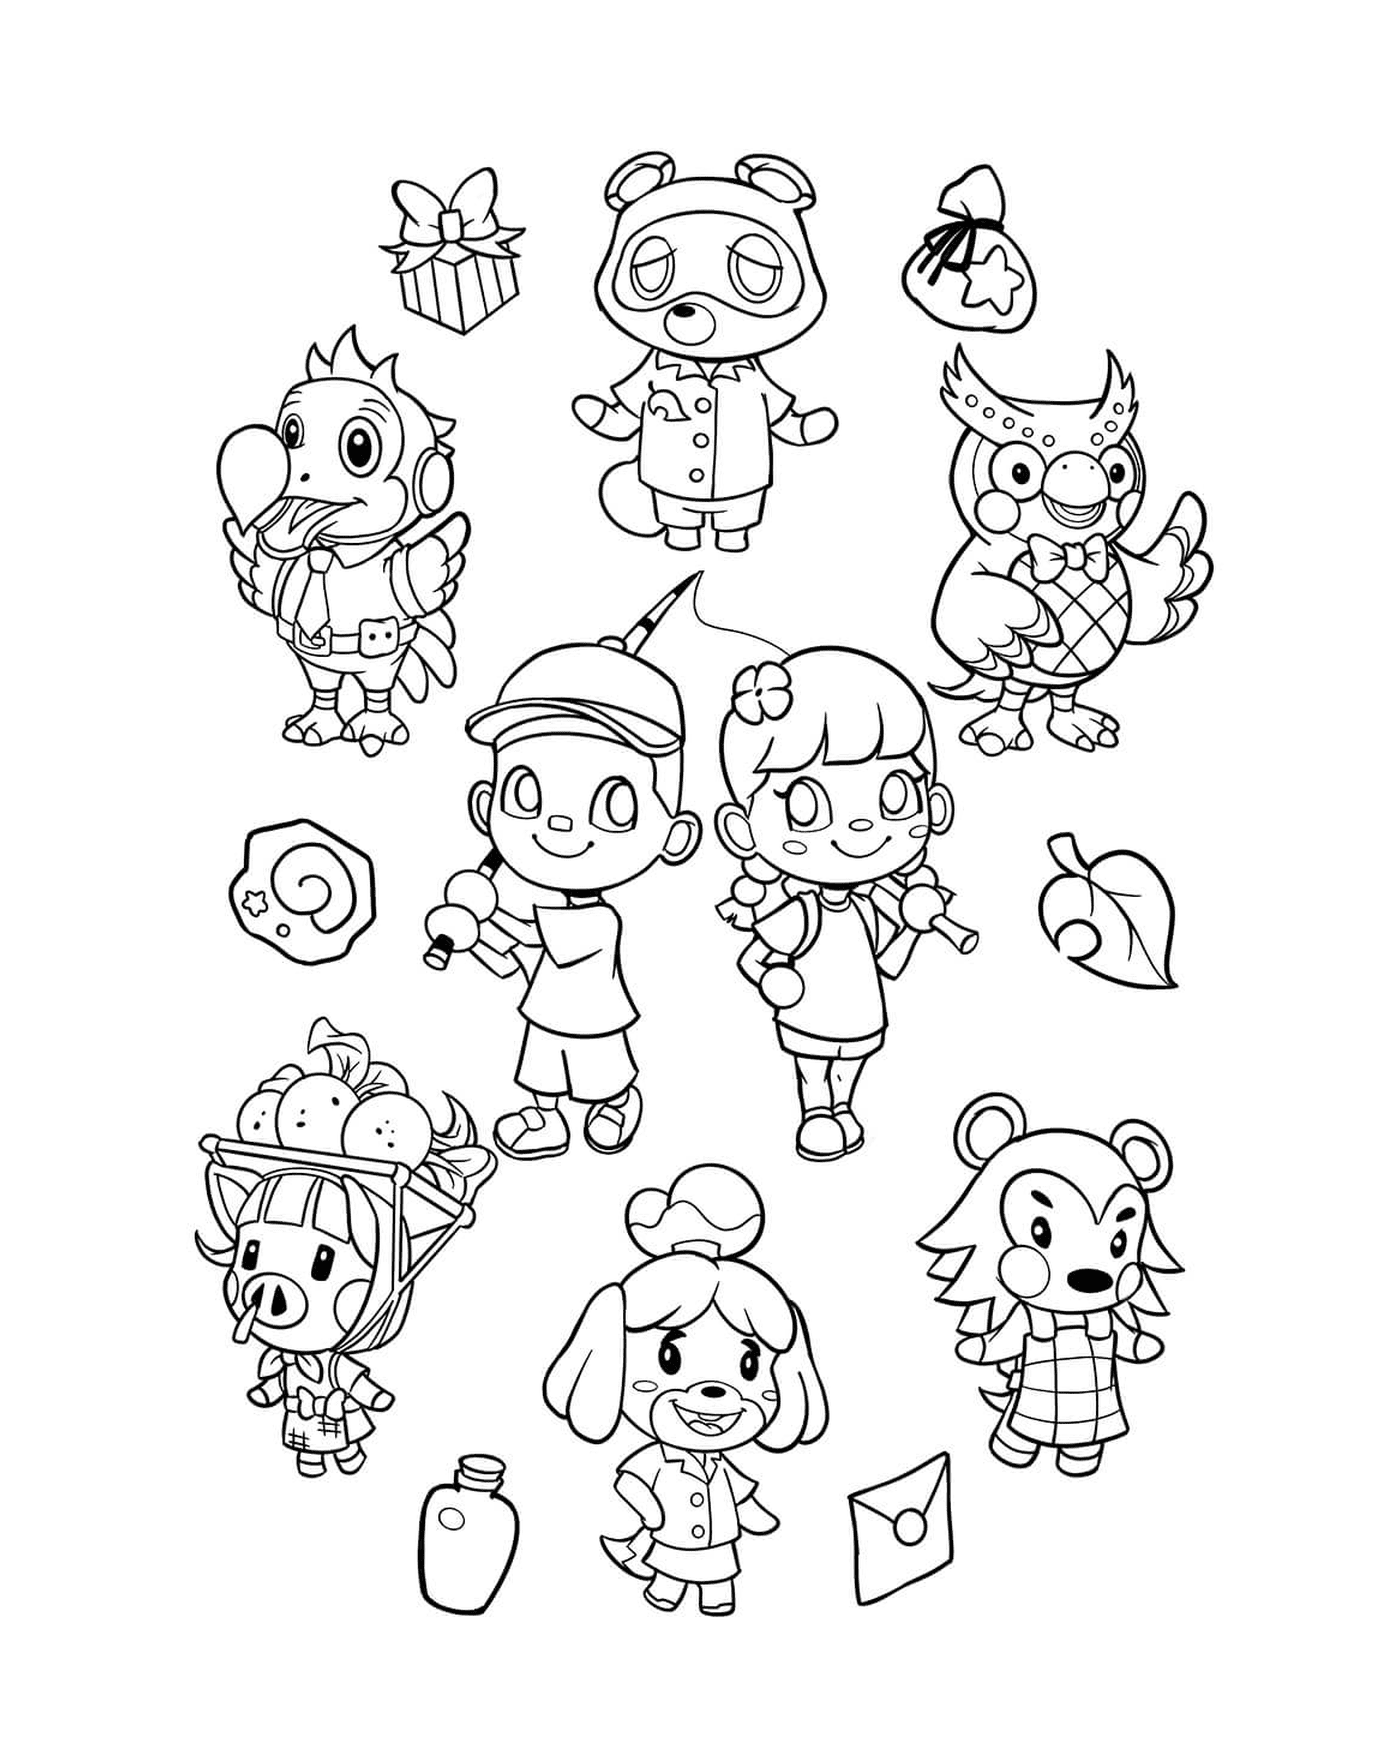  Animal Crossing New Horizons, several characters from Animal Crossing 